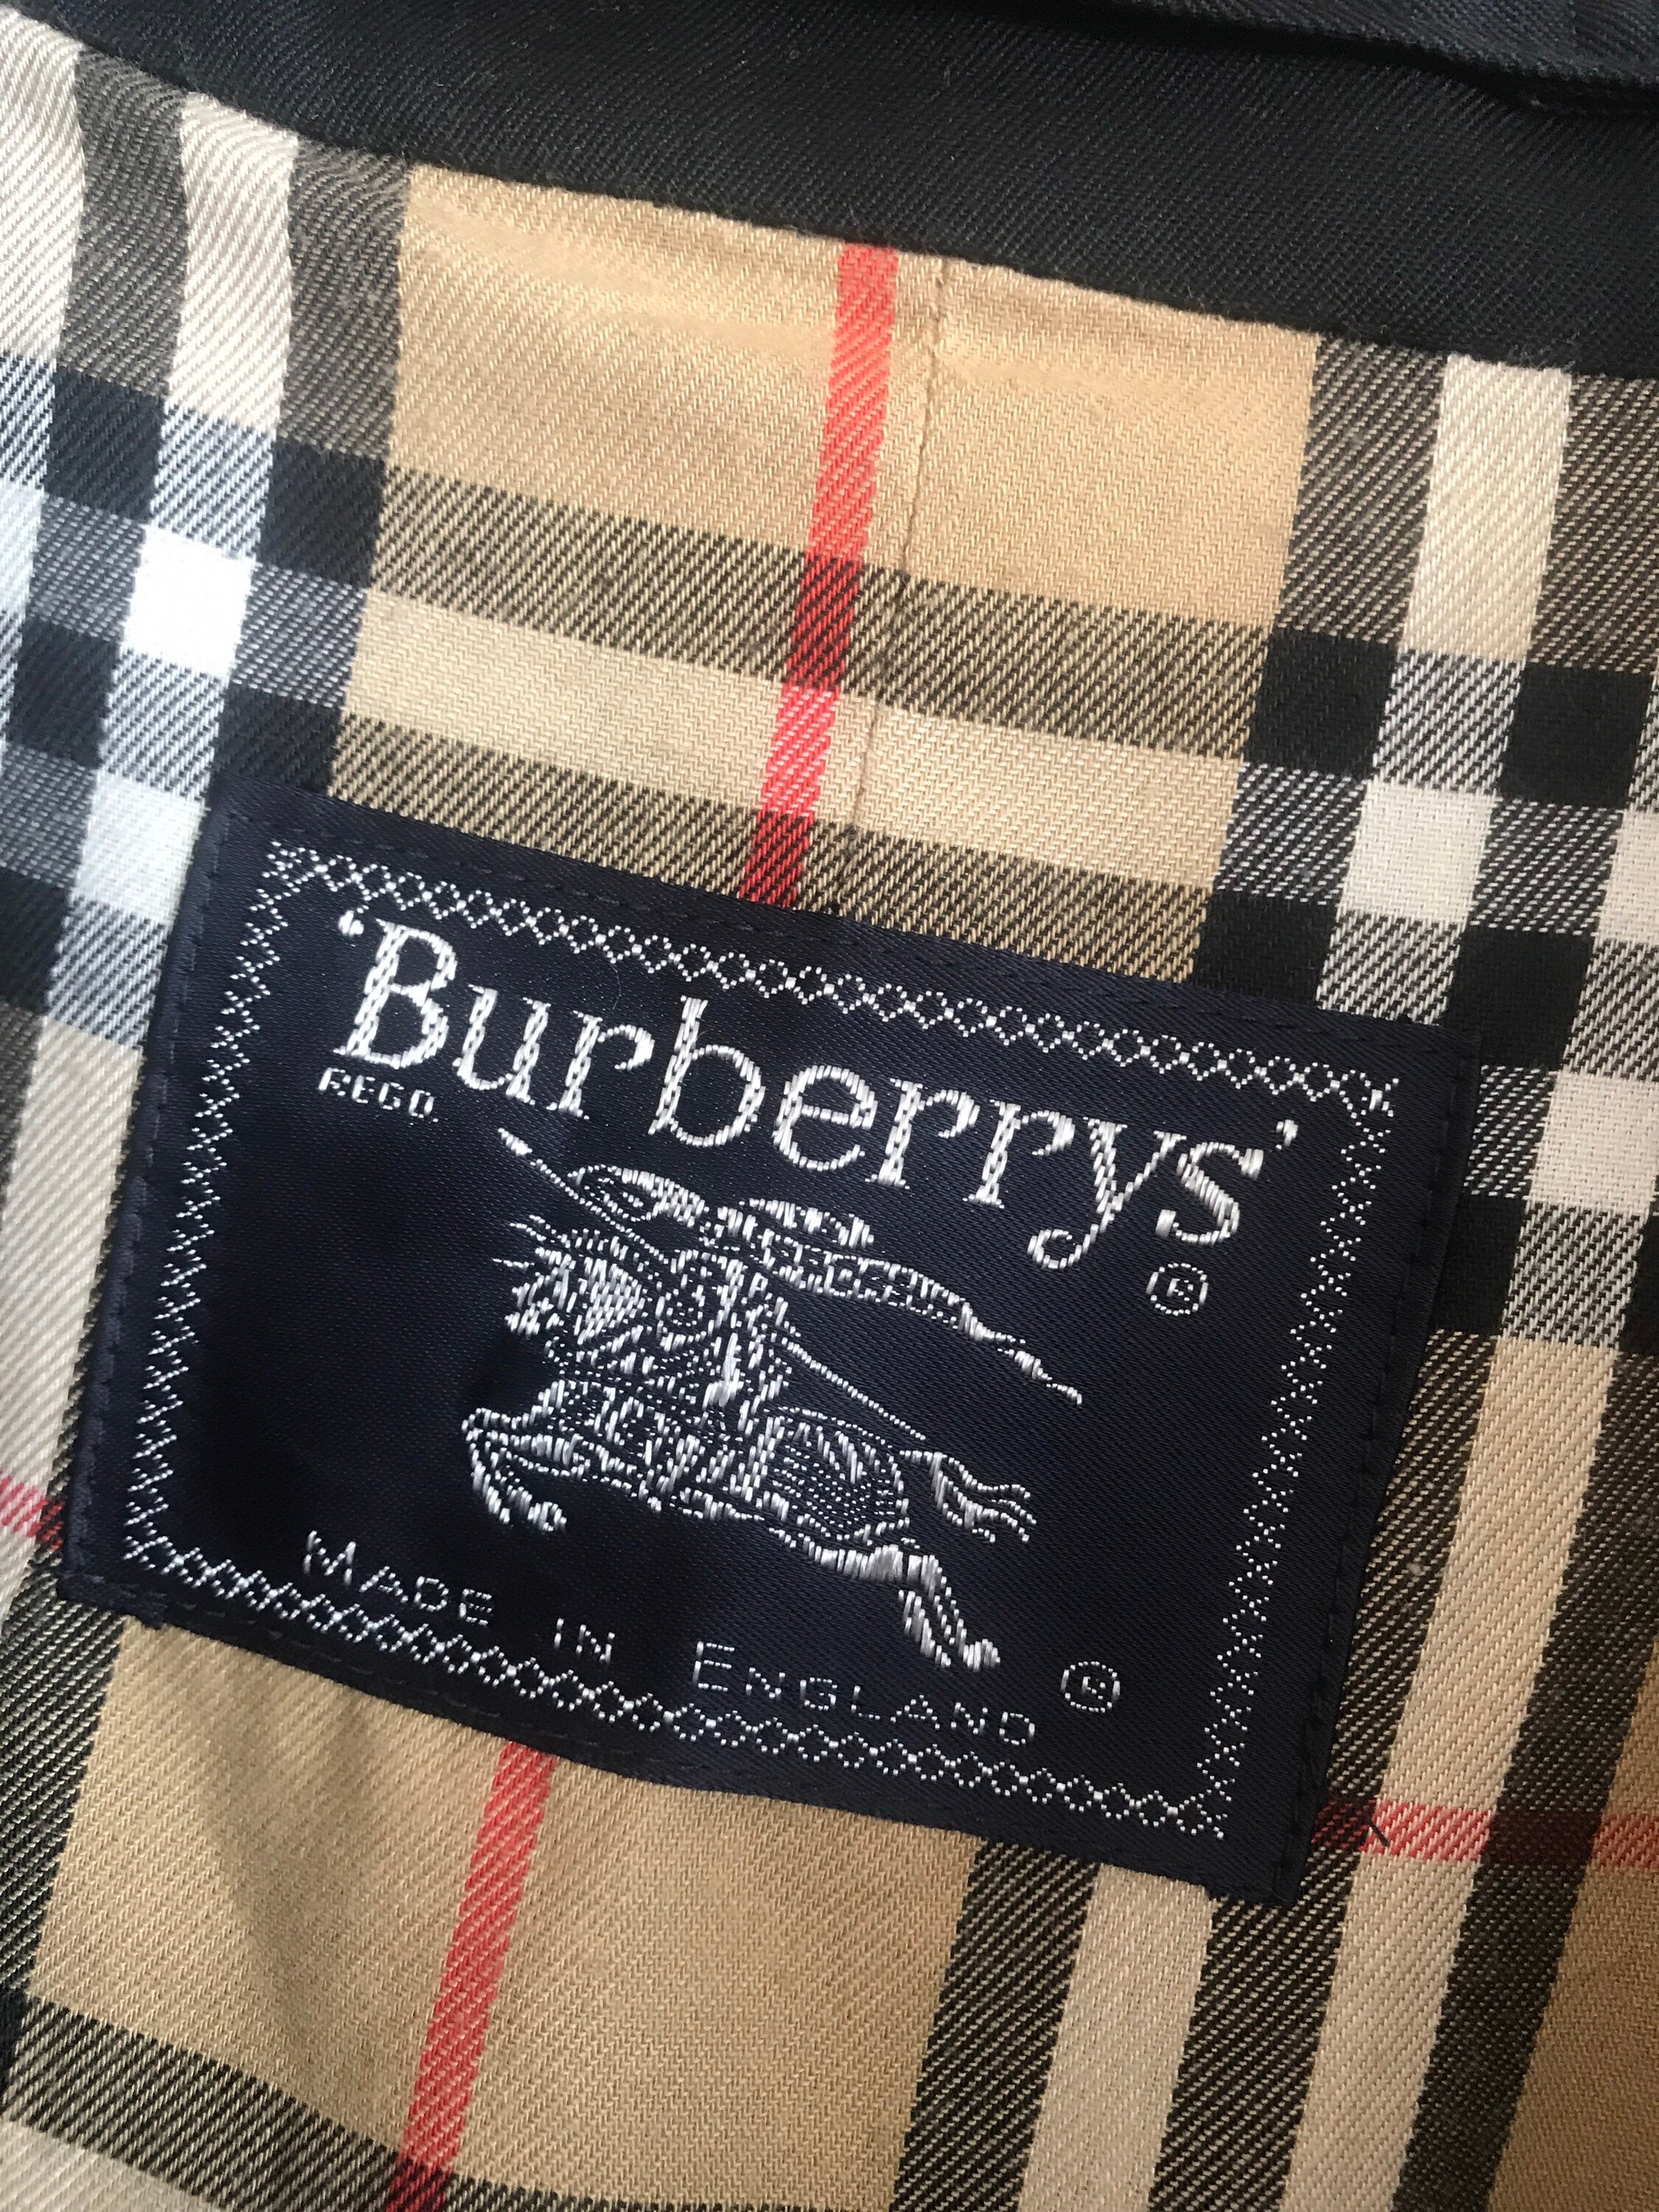 Burberrys vintage trench large mens coat rare | Etsy